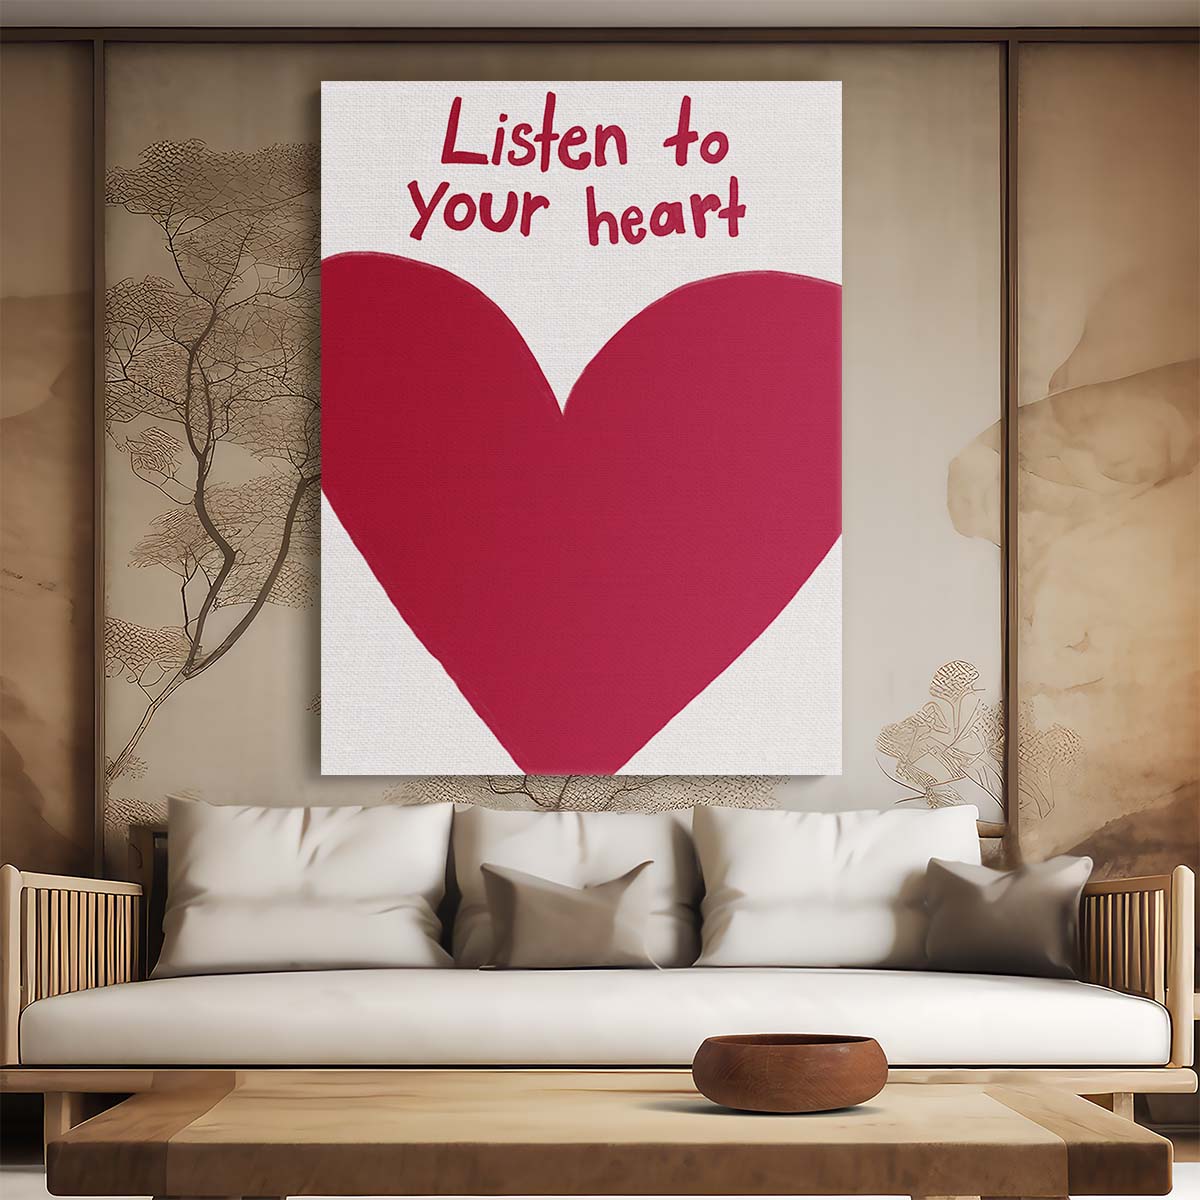 Romantic Inspirational Quote Illustration Listen to Your Heart by Luxuriance Designs, made in USA